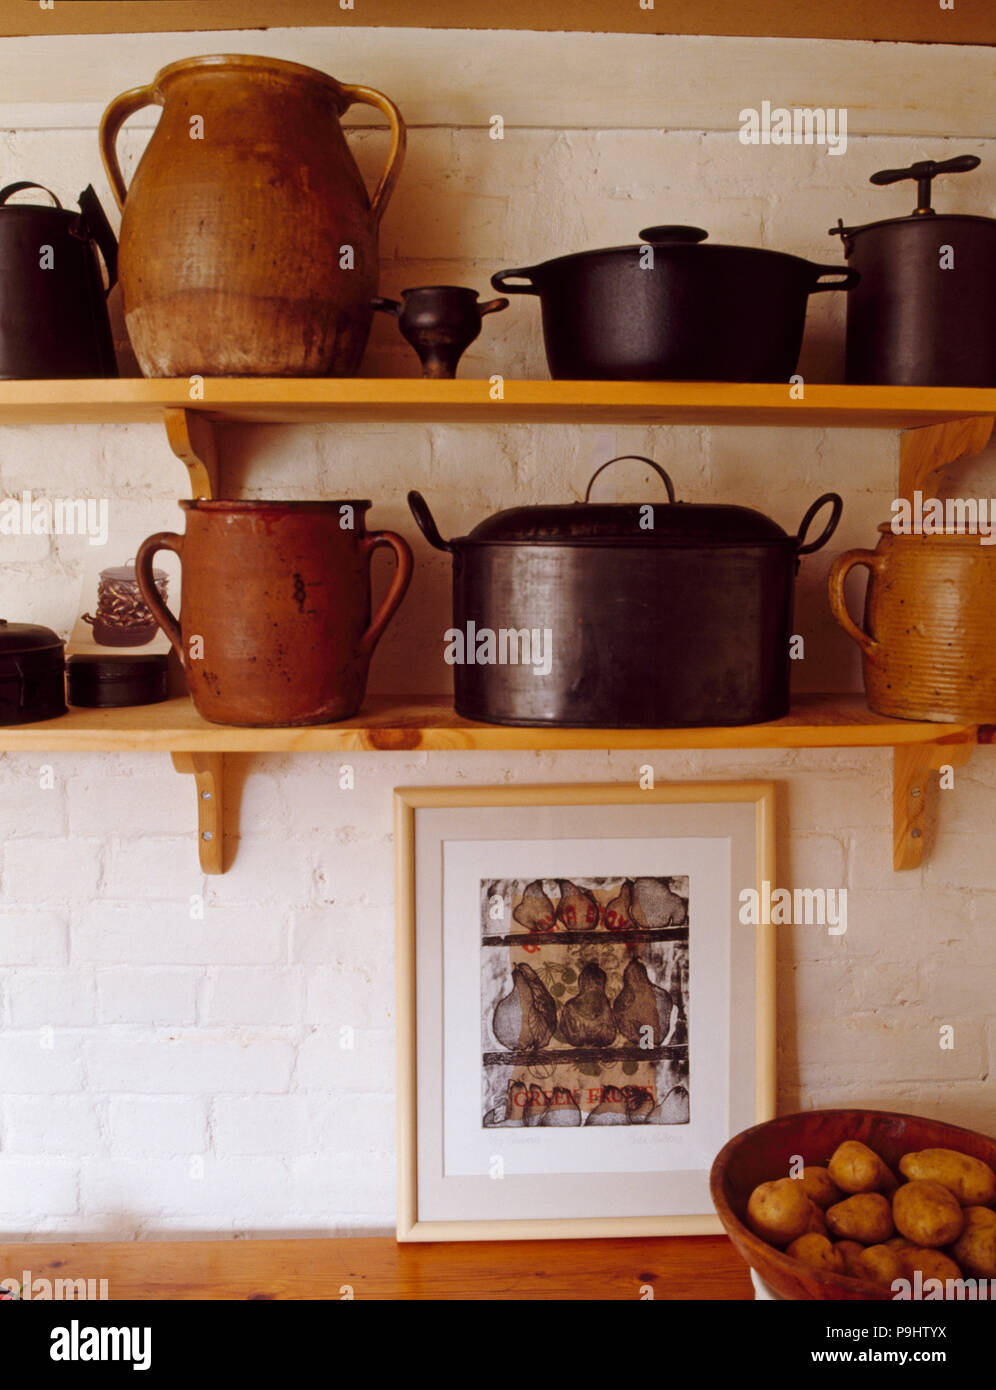 Collection of earthenware and cast-iron pots on simple wooden shelves in kitchen Stock Photo